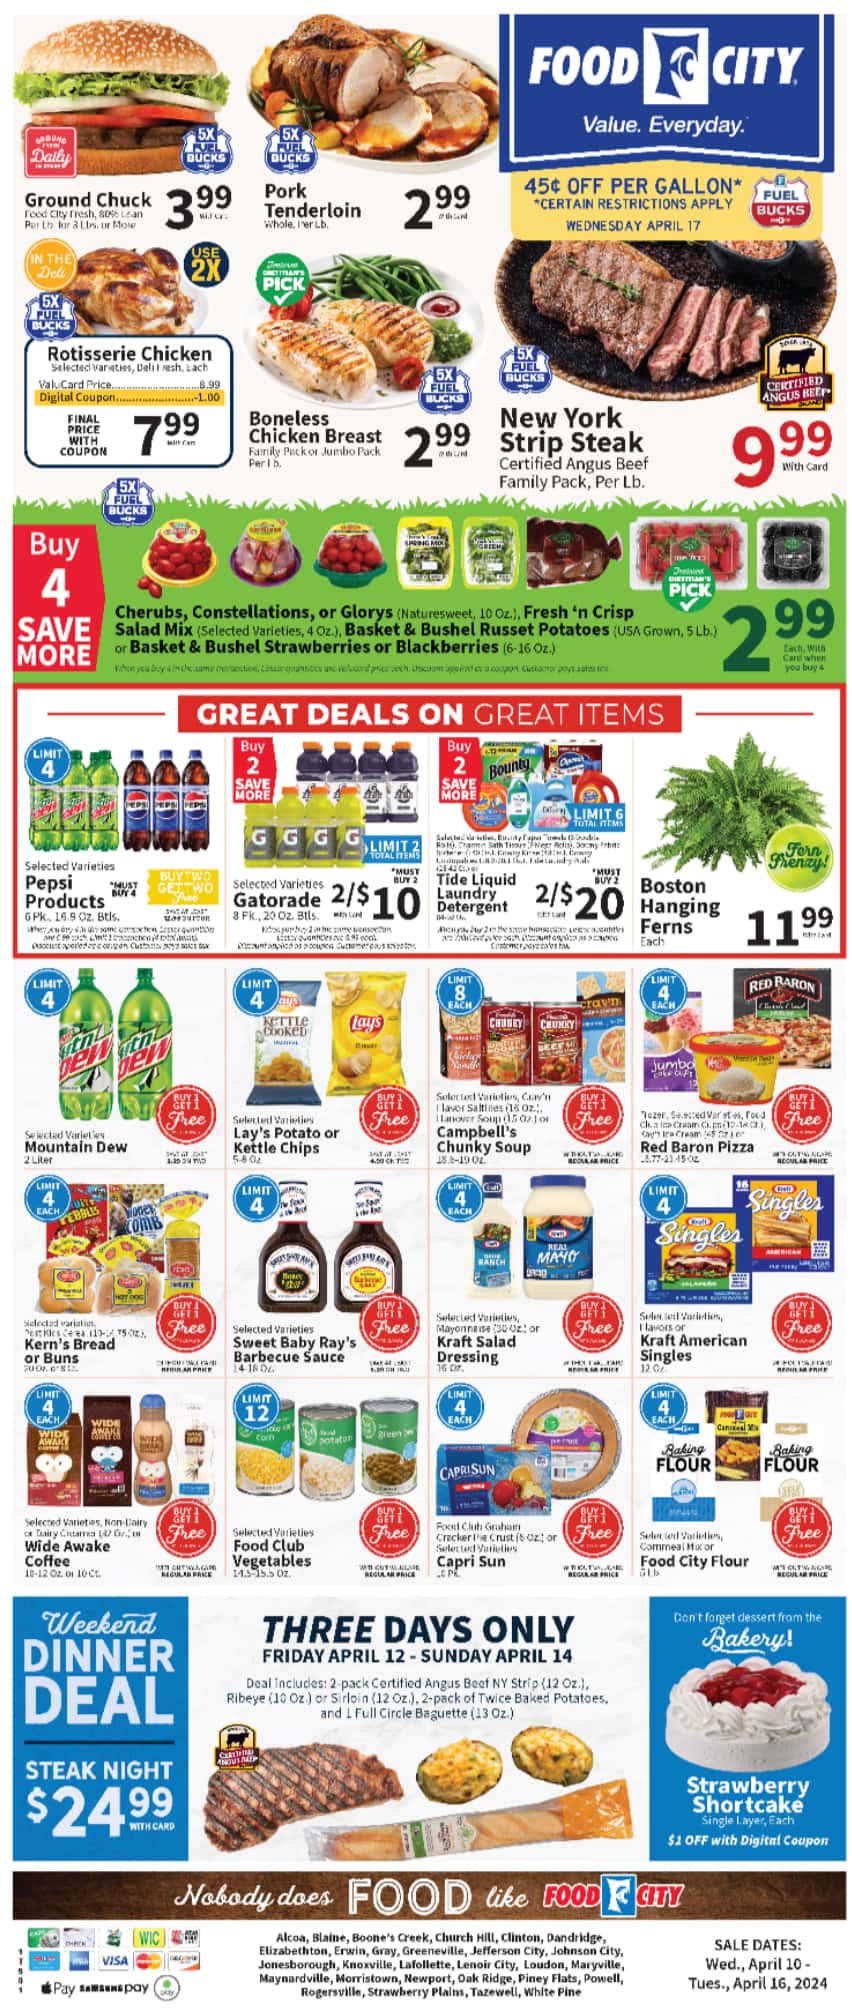 FoodCity_weekly_ad_041024_01